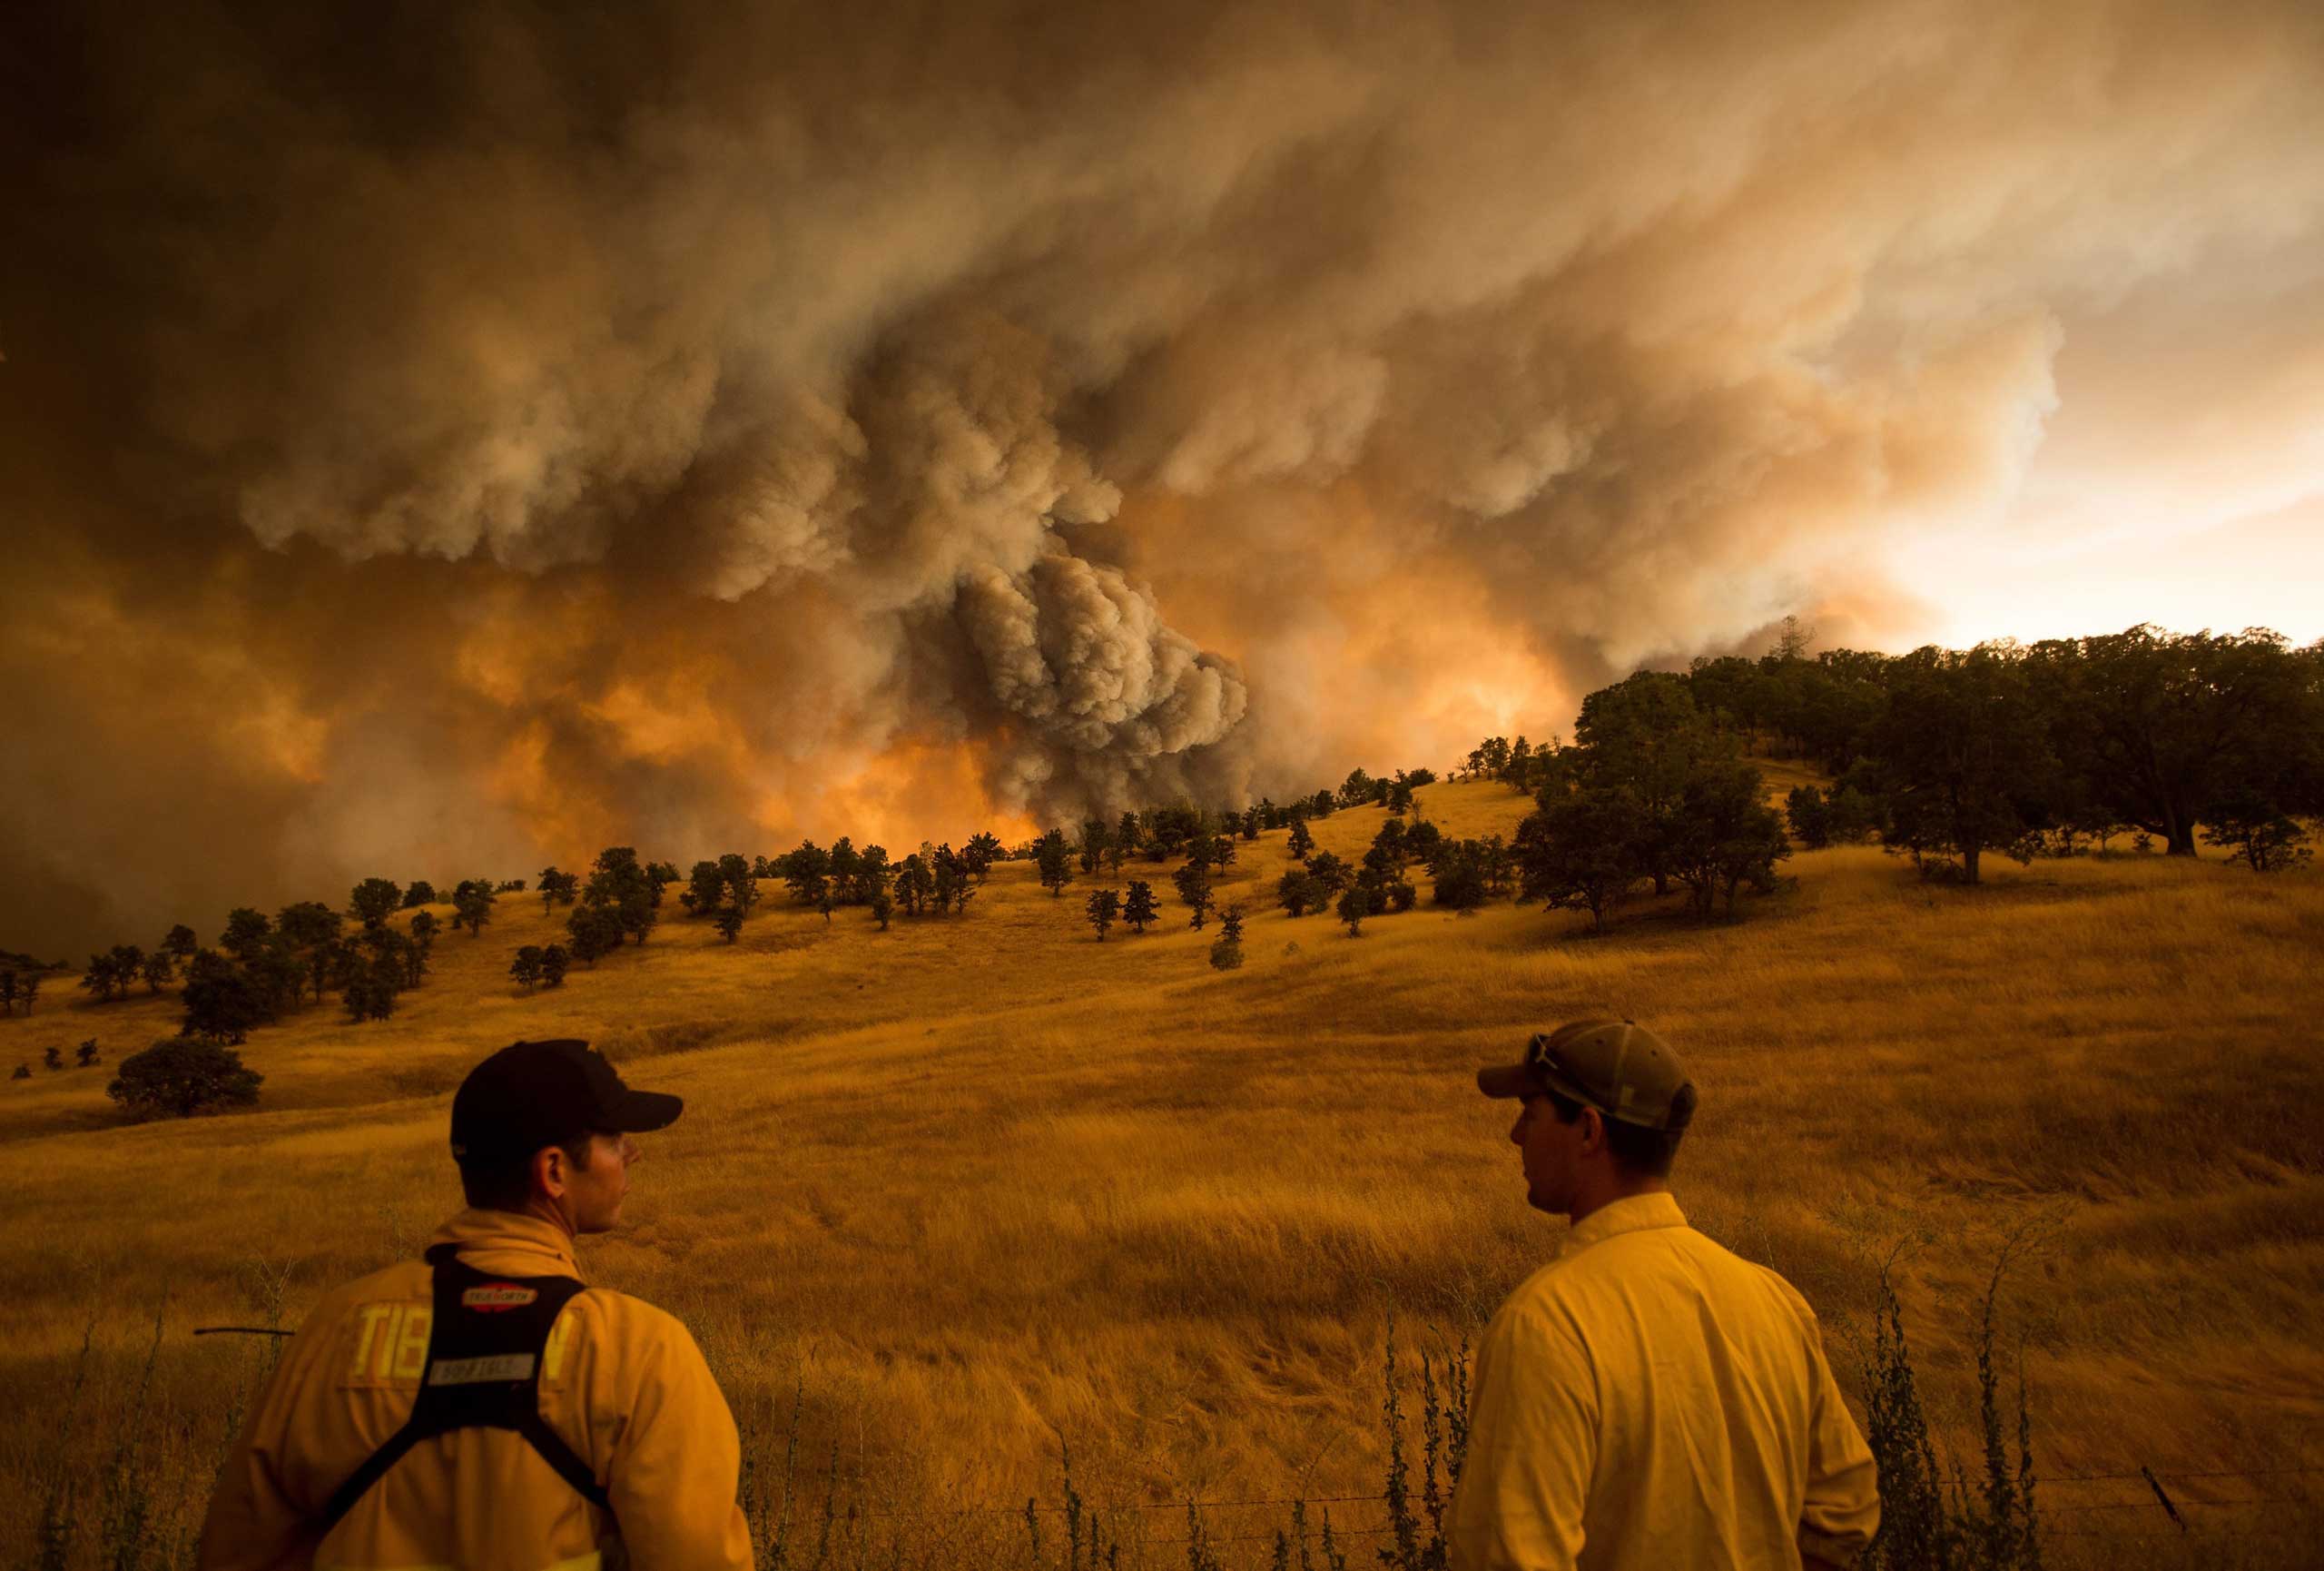 Firefighters watch as the Rocky fire burns near Clearlake, Calif. on Aug. 1, 2015.